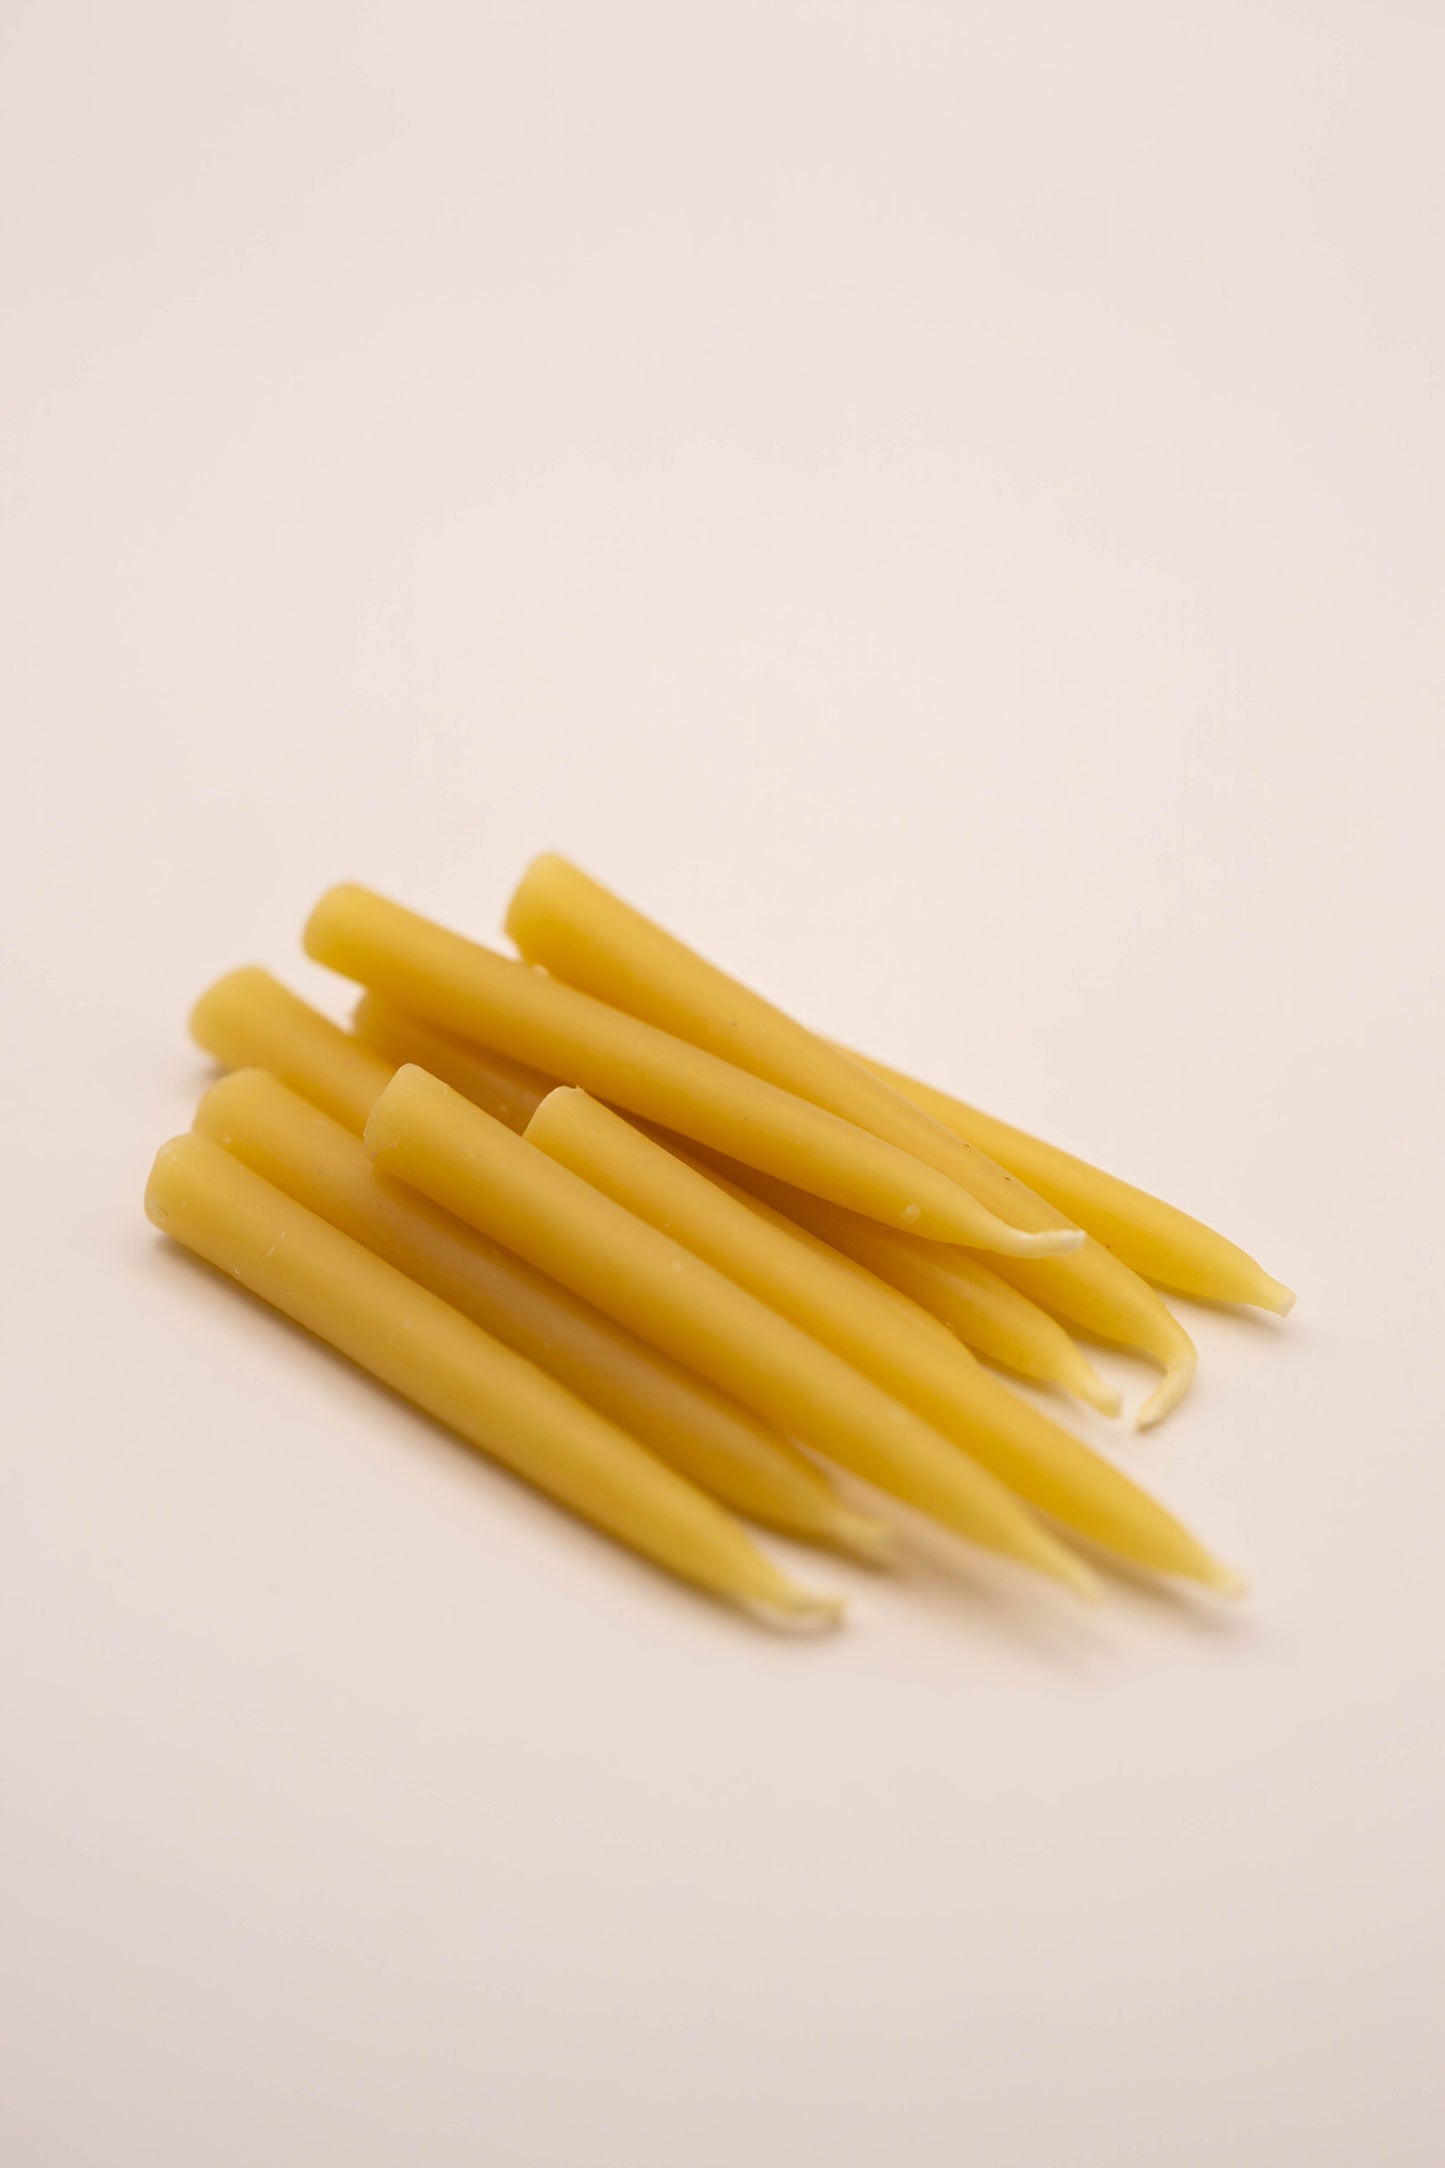 20-Minute Beeswax Candles - REFILL Candles: Set of 30, No Holder